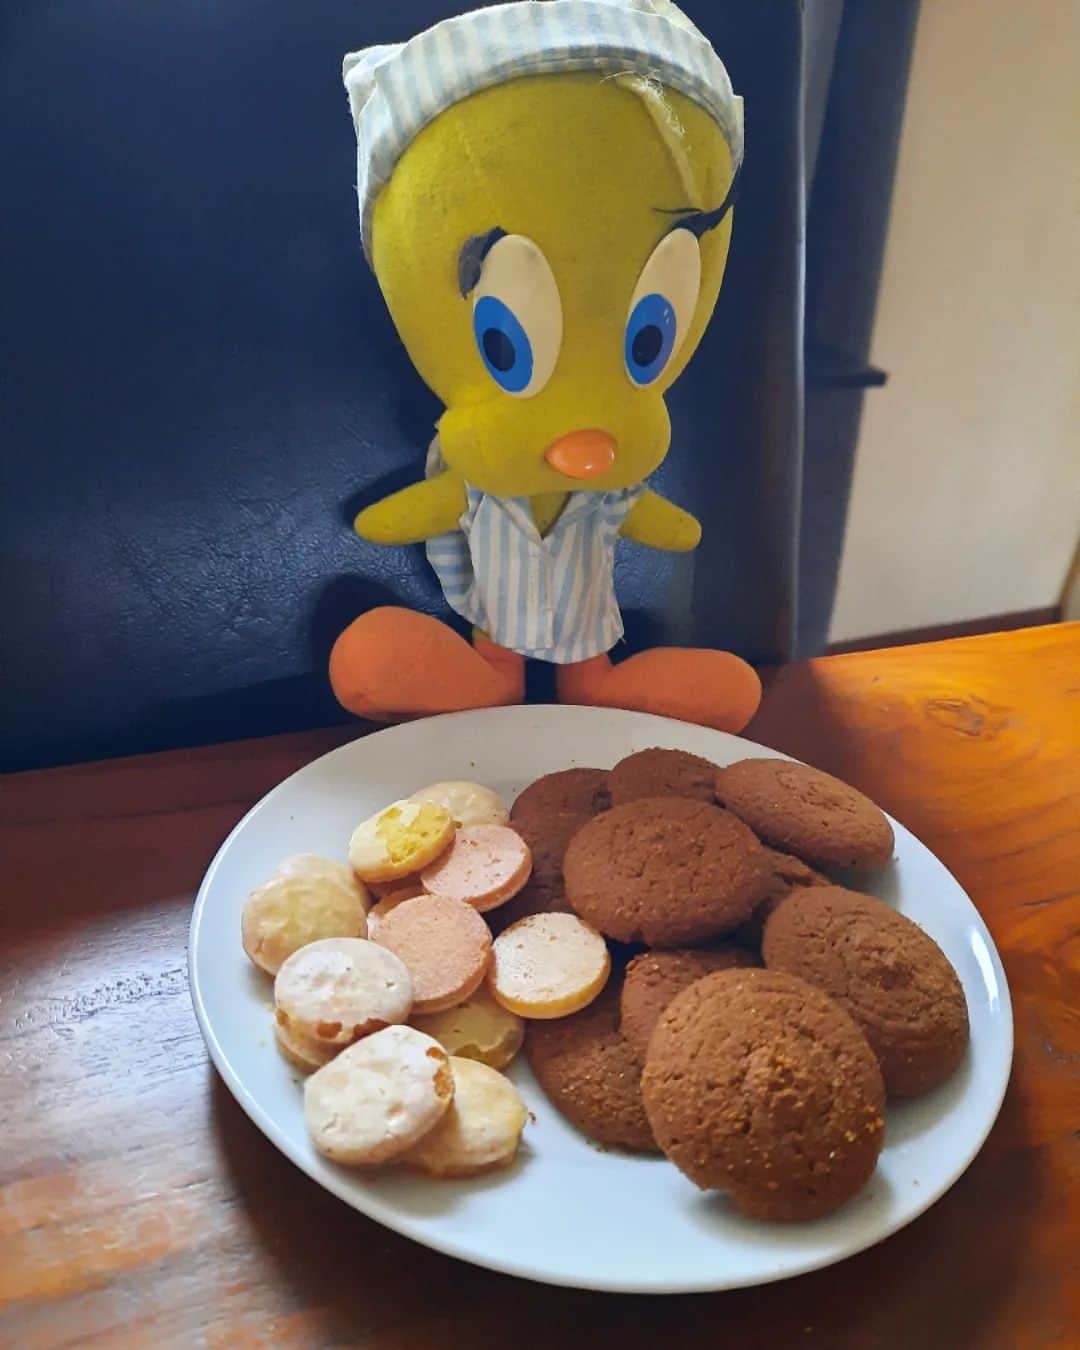 Little Yellow Birdのインスタグラム：「For this weeks #honeygroveteapartytuesday I bring nothing Halloweeny, just a delicious taste of Madeira (sorry guys, still there with my head and heart)...bolo de Mel de Cana (honey cookies) and the small ones are lemon Paciencias! #littleyellowbird #tweety #tweetykweelapis #adventures #yellow #bird #tuesday #sweet #sweettreat #sweettooth #cookies #madeira #bolodemel #bolodemeldecana #paciencia #lemon #crunchy #stuffedanimalsofinstagram #plushiesofinstagram」